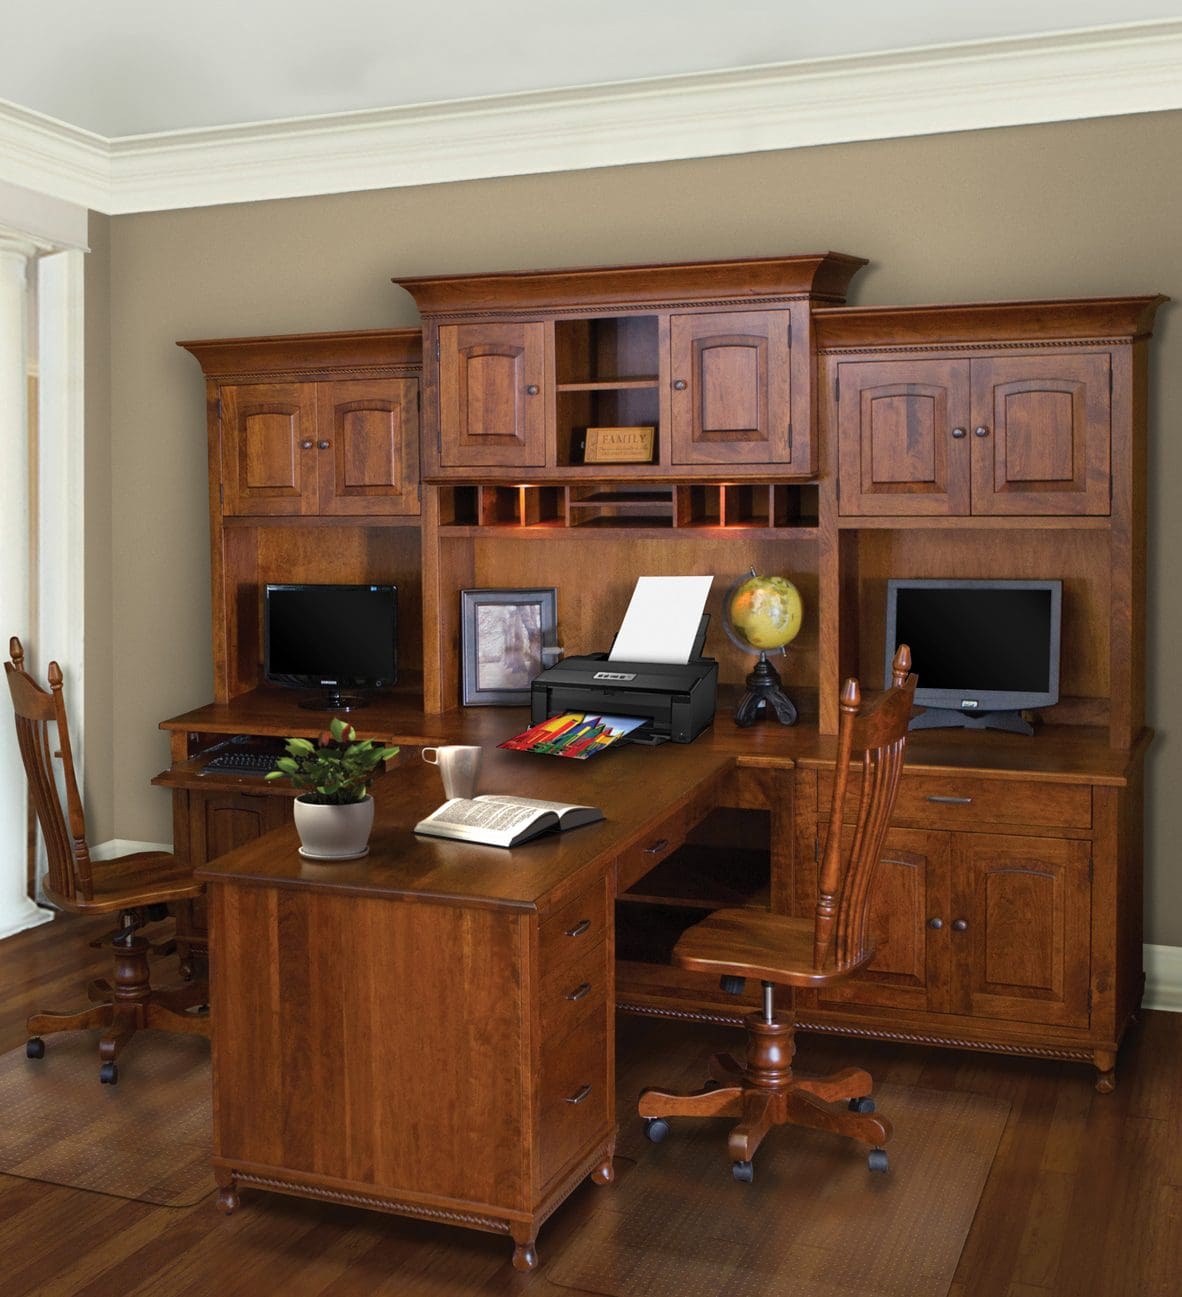 Large desk with a hutch and 2 sides with 2 chairs, 2 computers, a printer, and 2 L shape desks that meet in the middle.